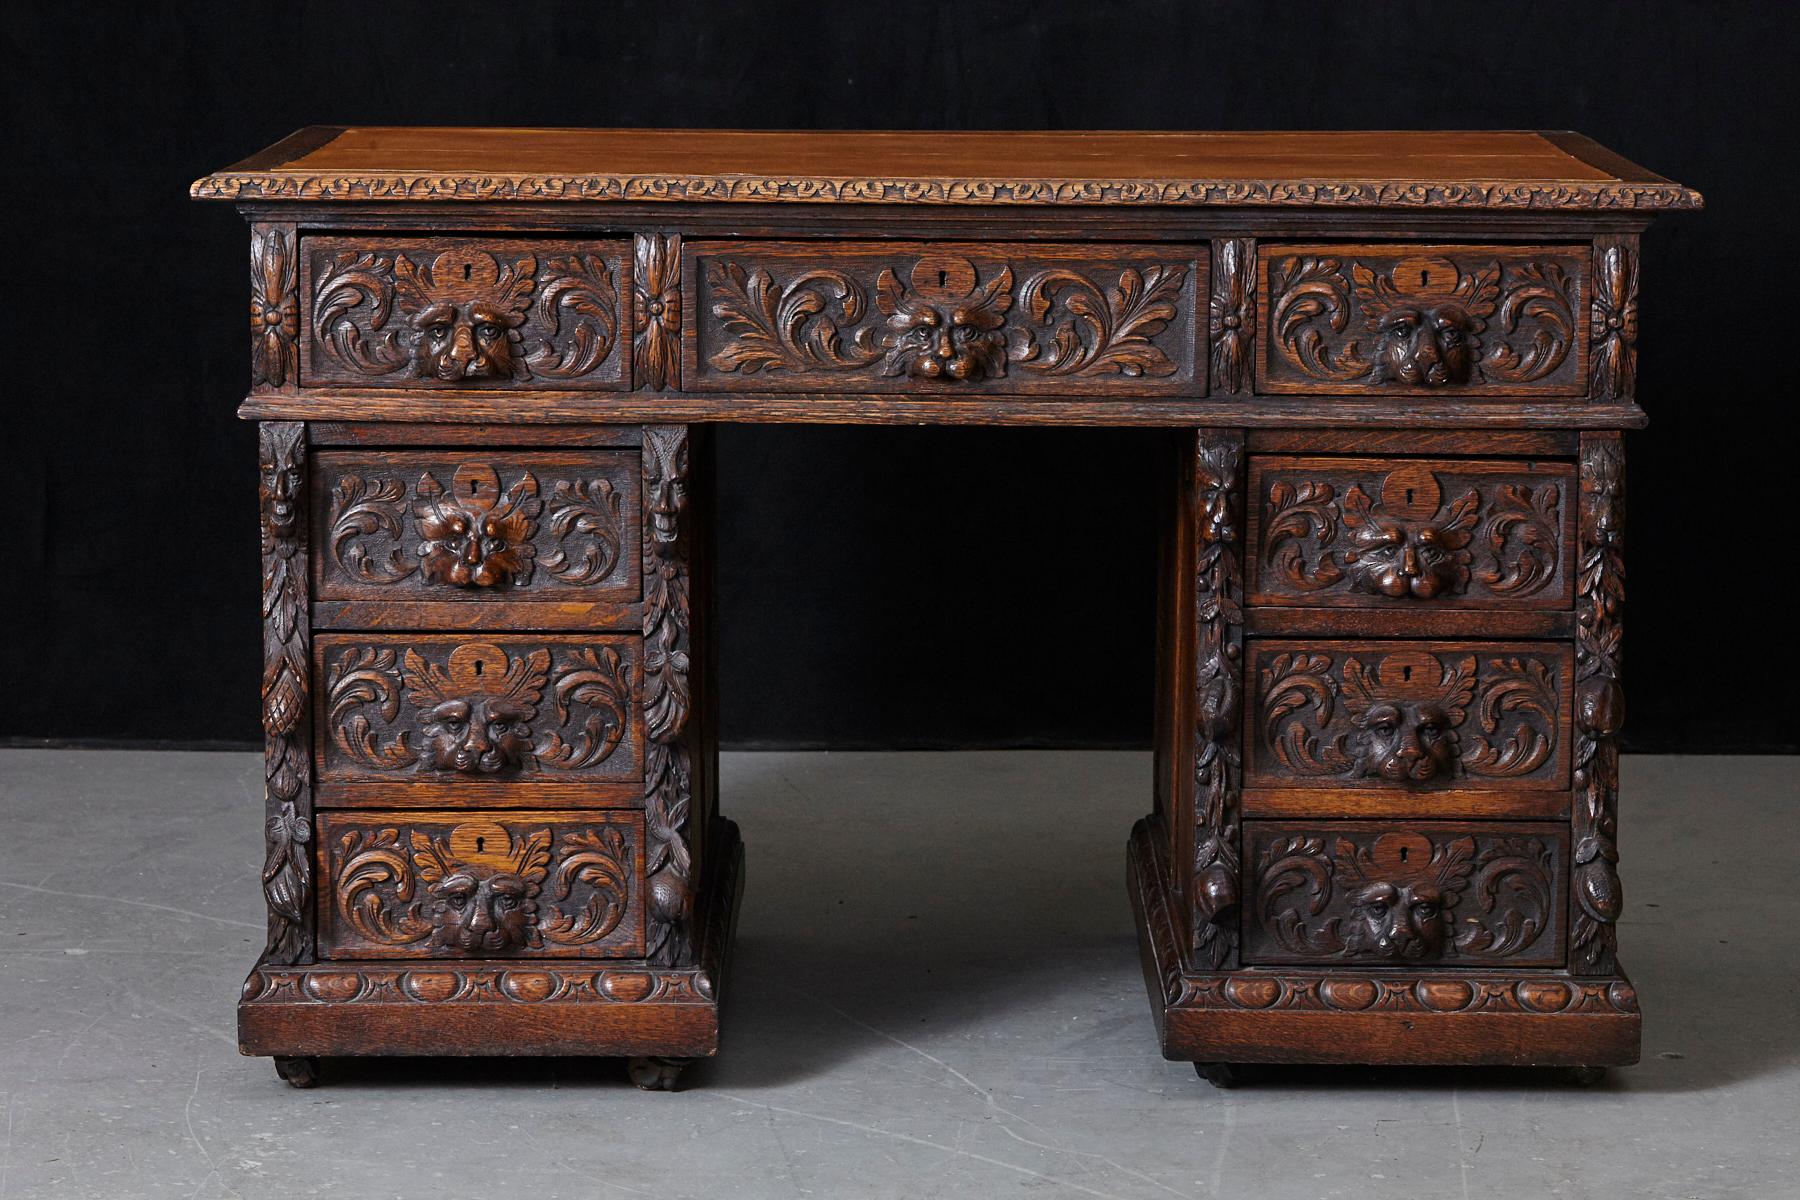 Victorian intricately carved oak freestanding kneehole desk on casters, with one long middle drawer and four graduating drawers on either side with Gothic style lion head handles.
The top of the desk has a brown replacement leather insert and the